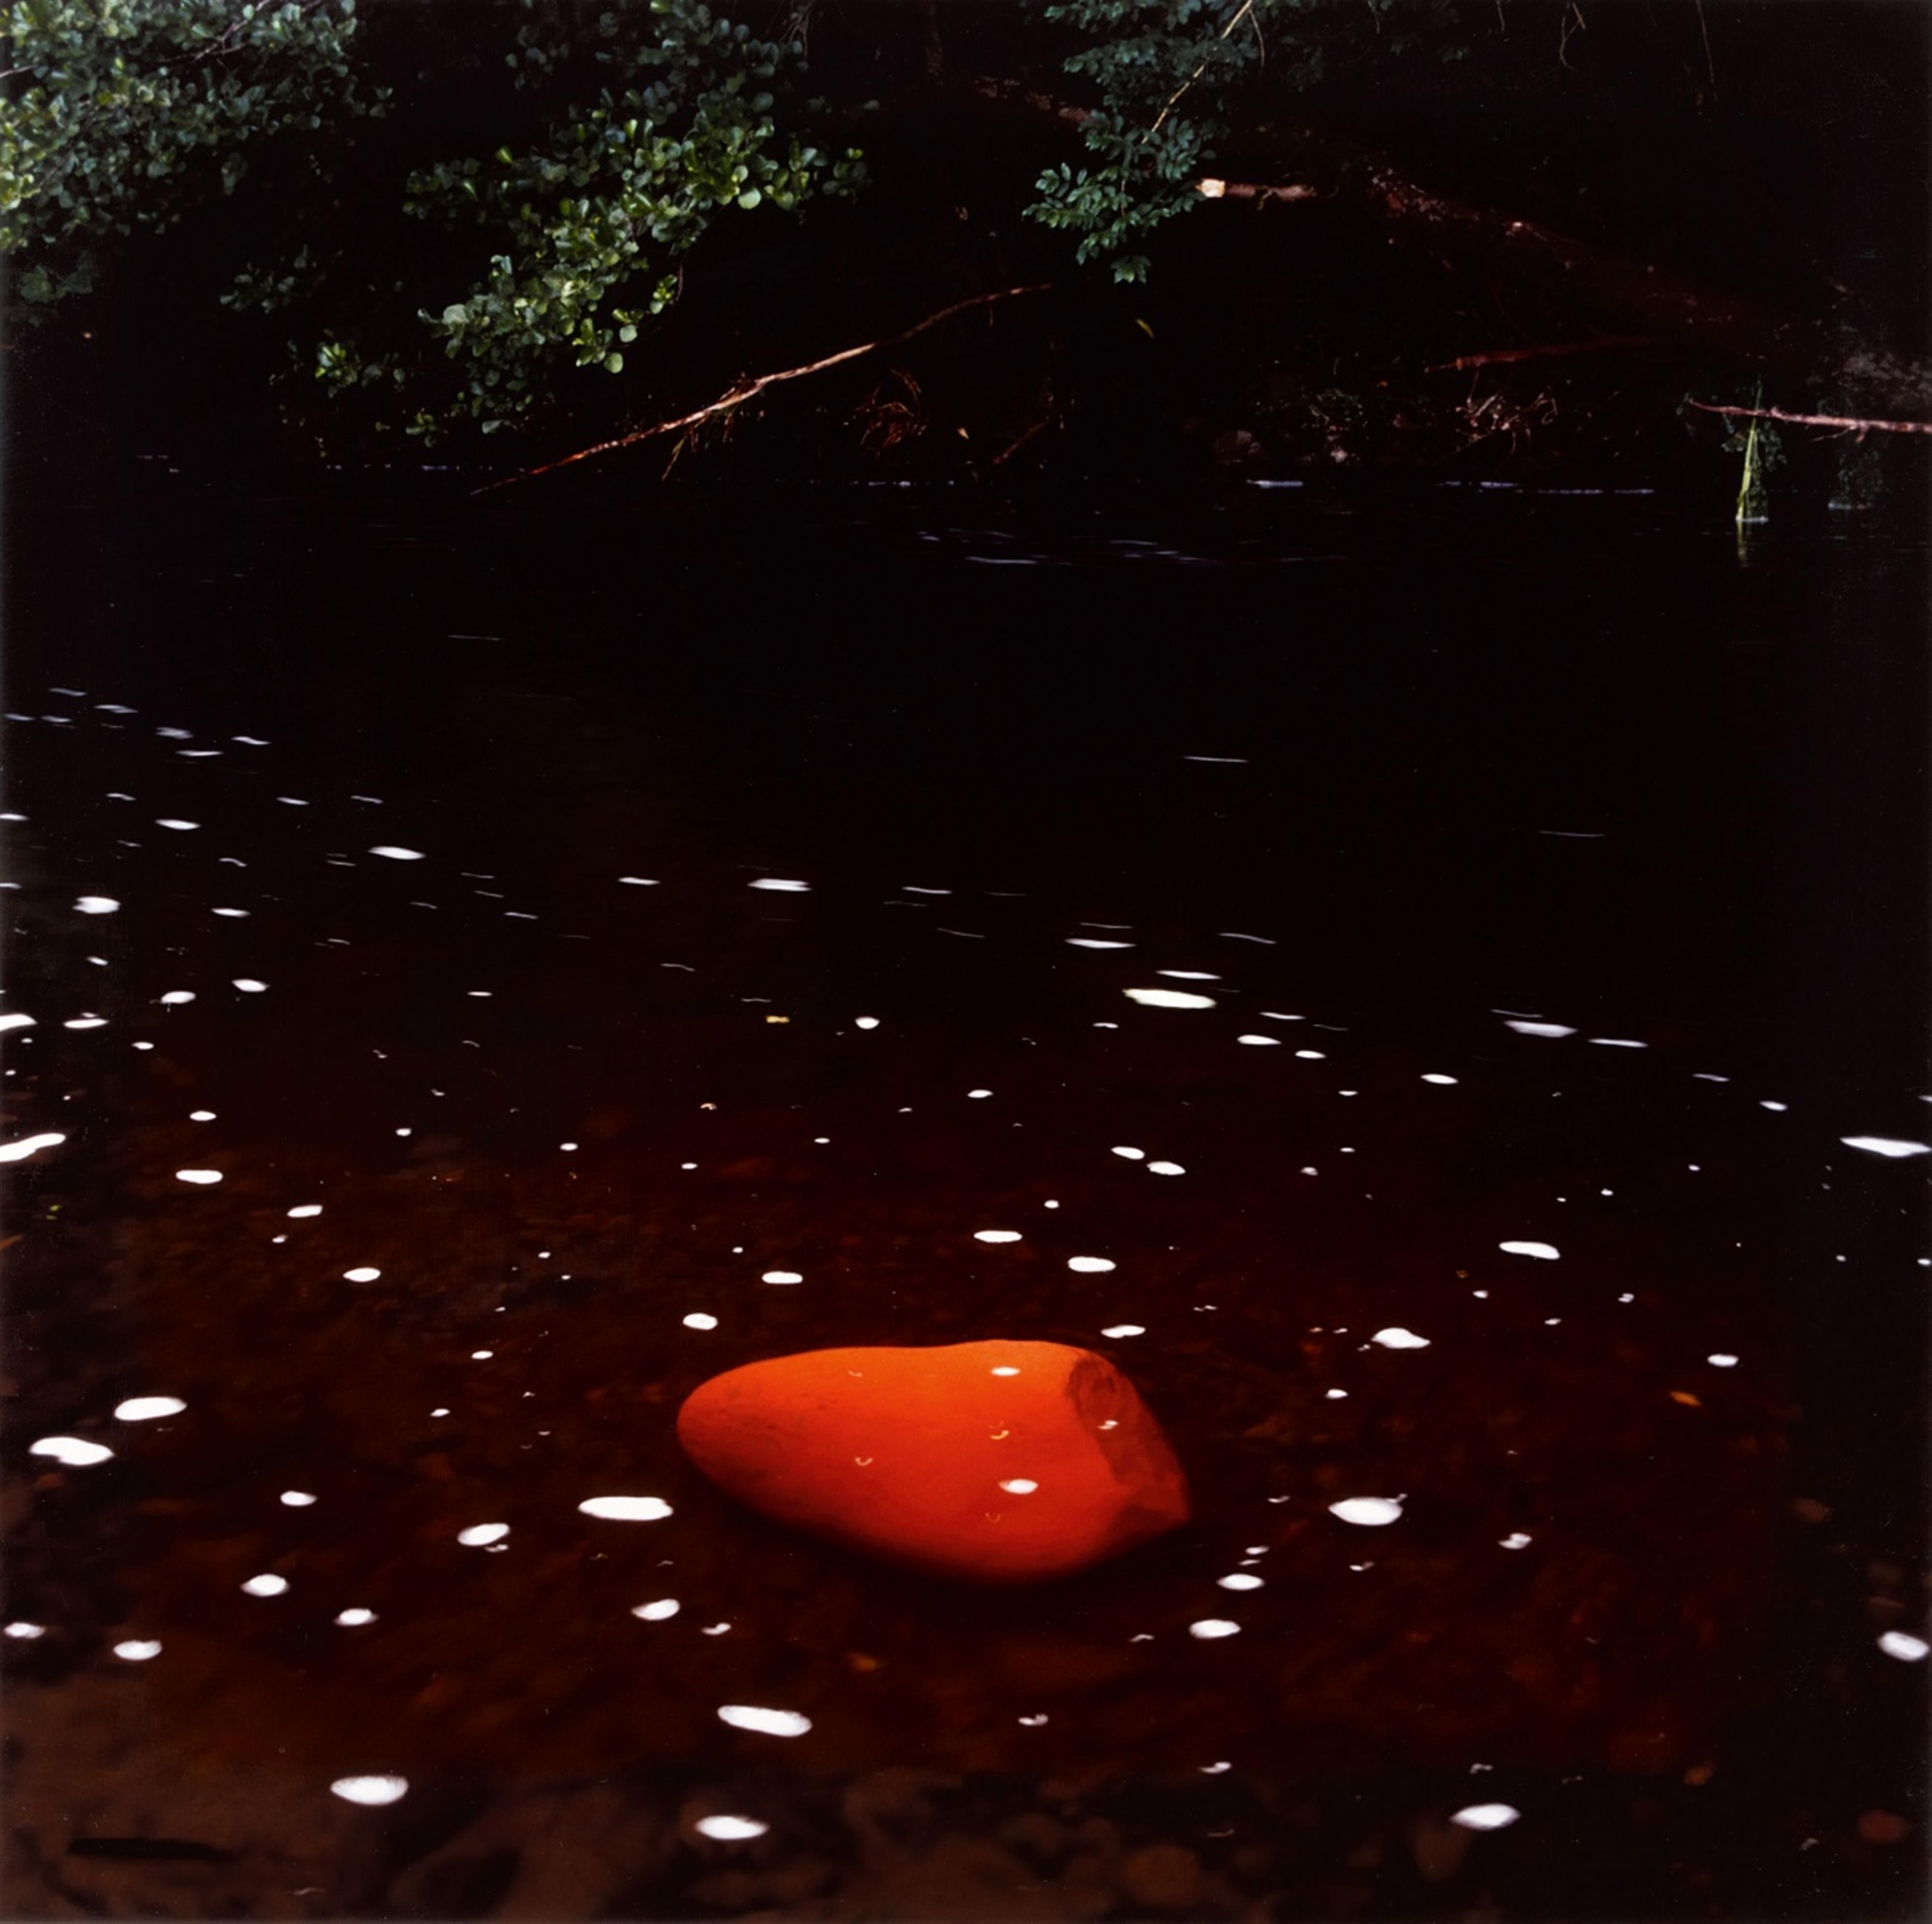 Andy Goldsworthy - River Rock, drawn over with a soft red stone, Scaur Water, Dumfriesshire - image-2